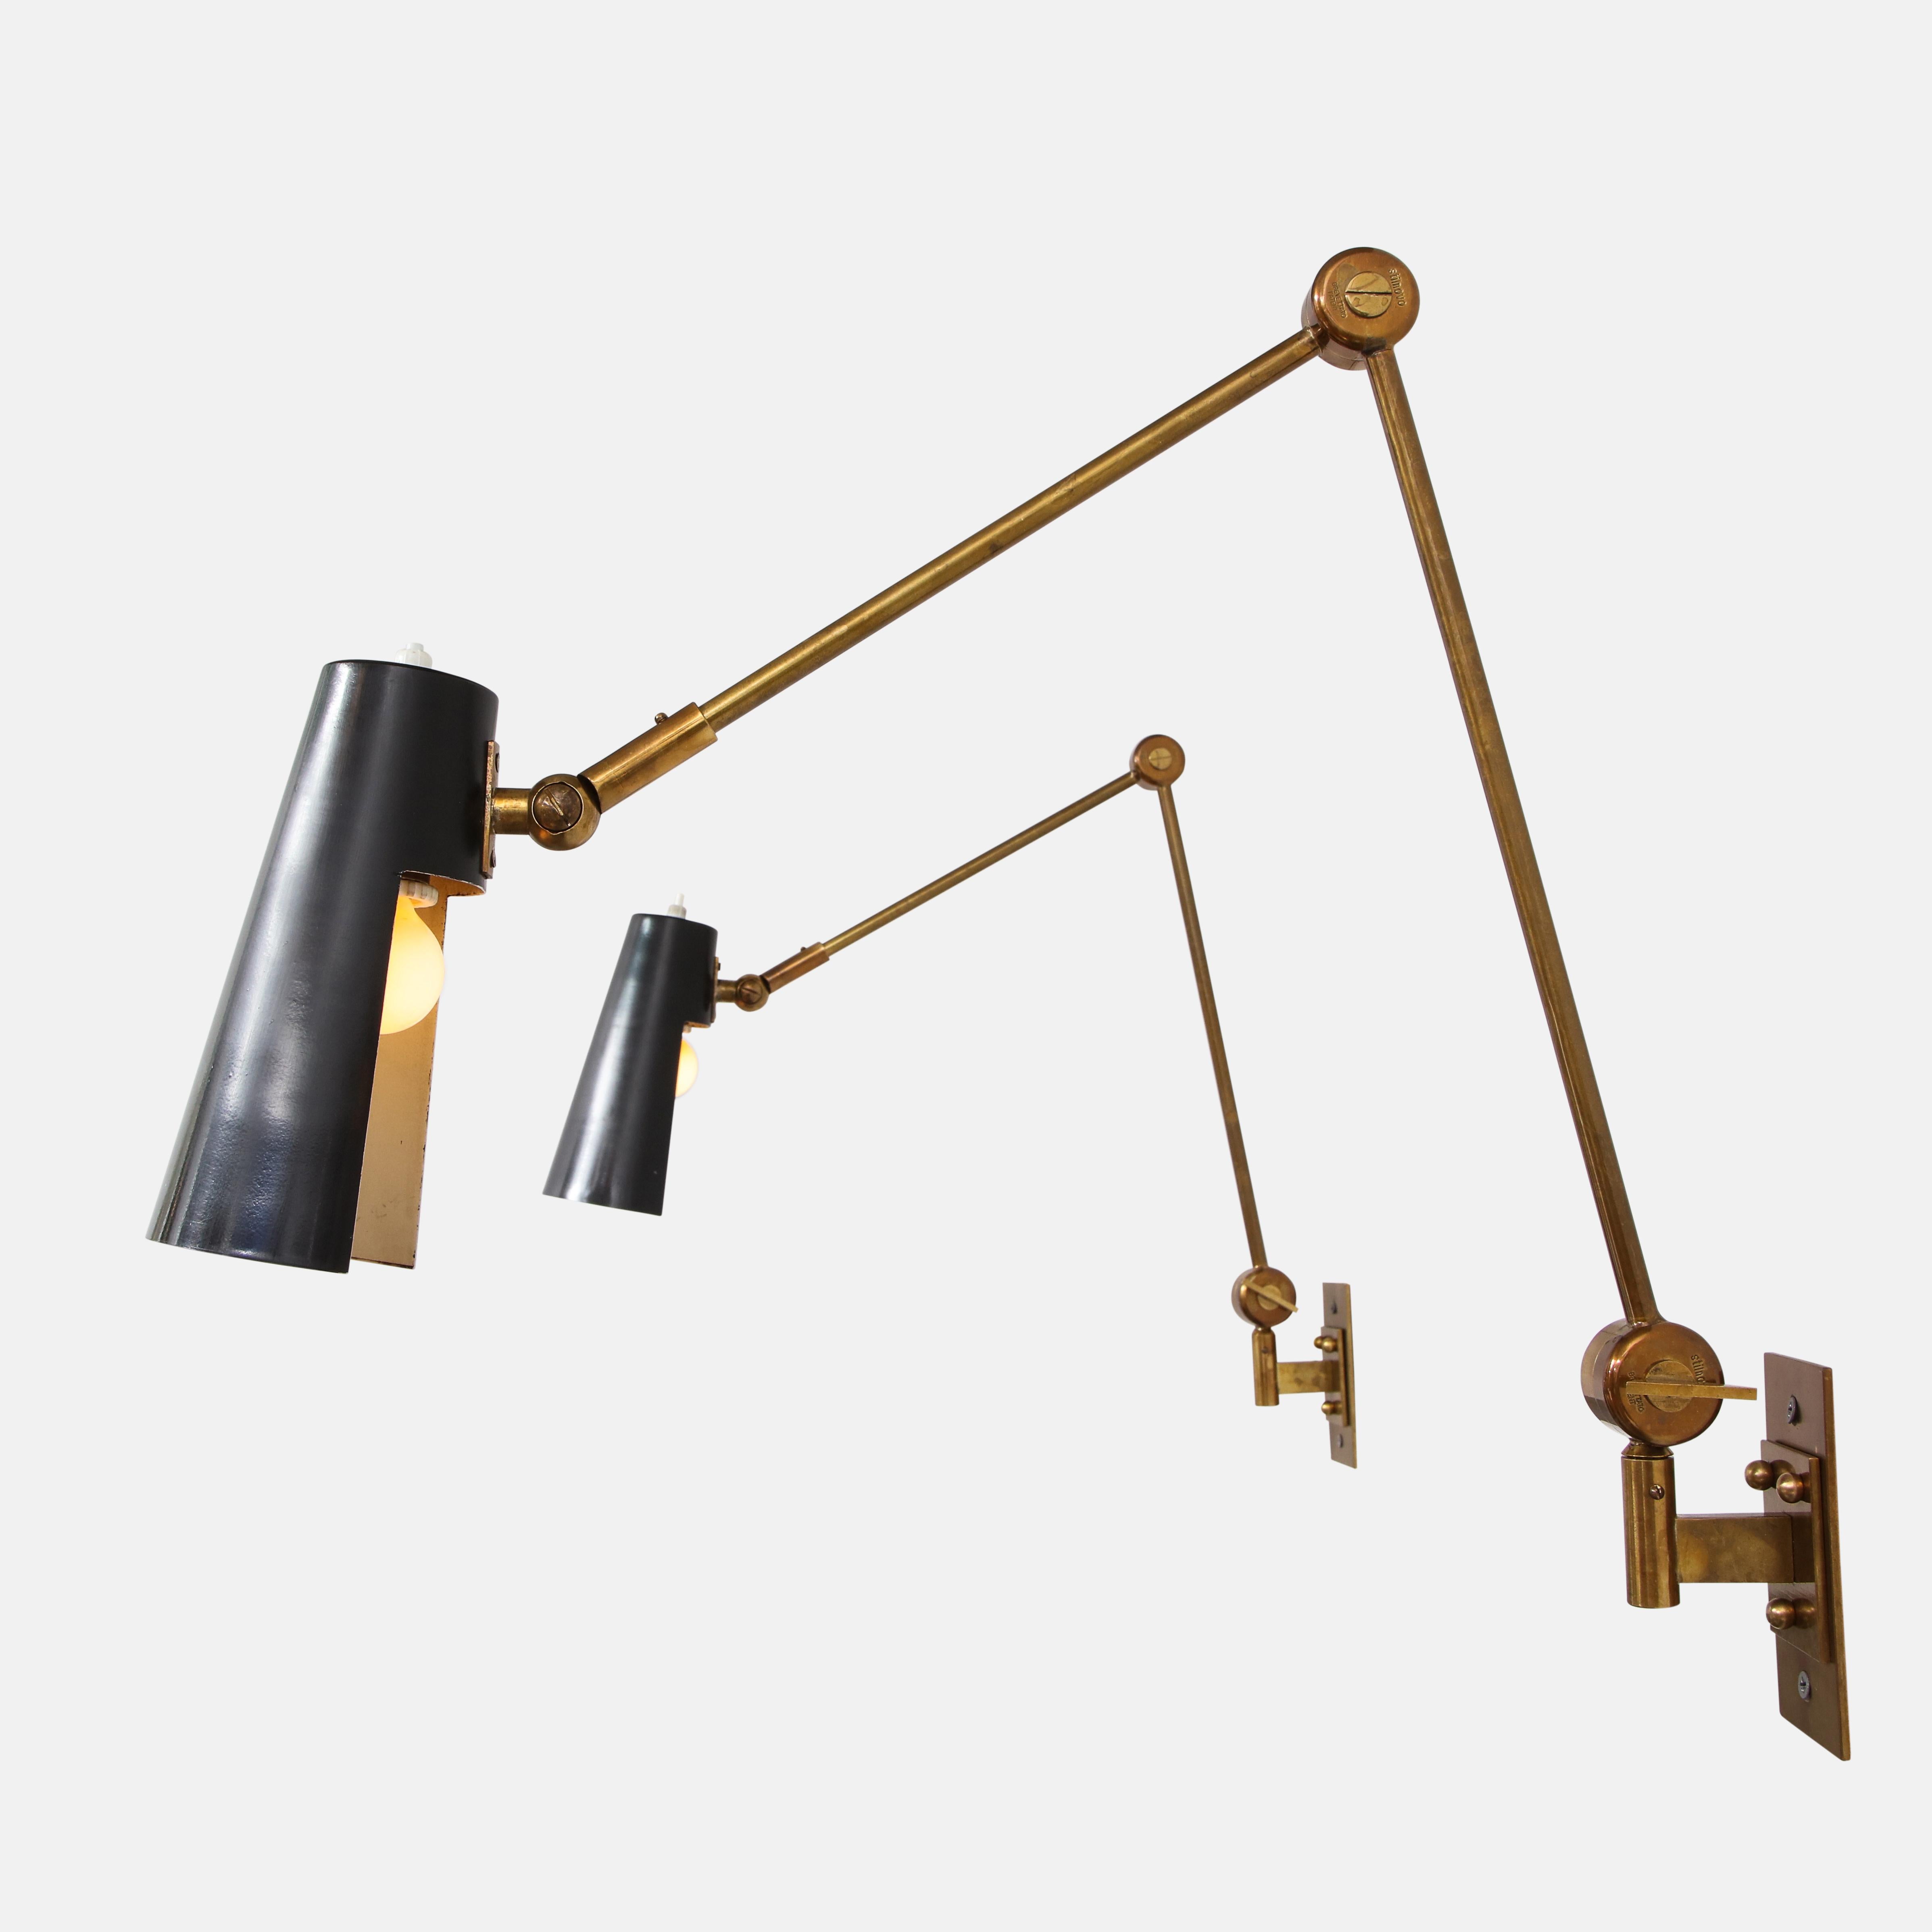 Stilnovo pair of articulating wall lights model 2024 with black enameled perforated metal shades on brass arms. The metal shades pivot from ball joints and the articulating arms are adjustable from butterfly keys. Beautifully designed and executed,